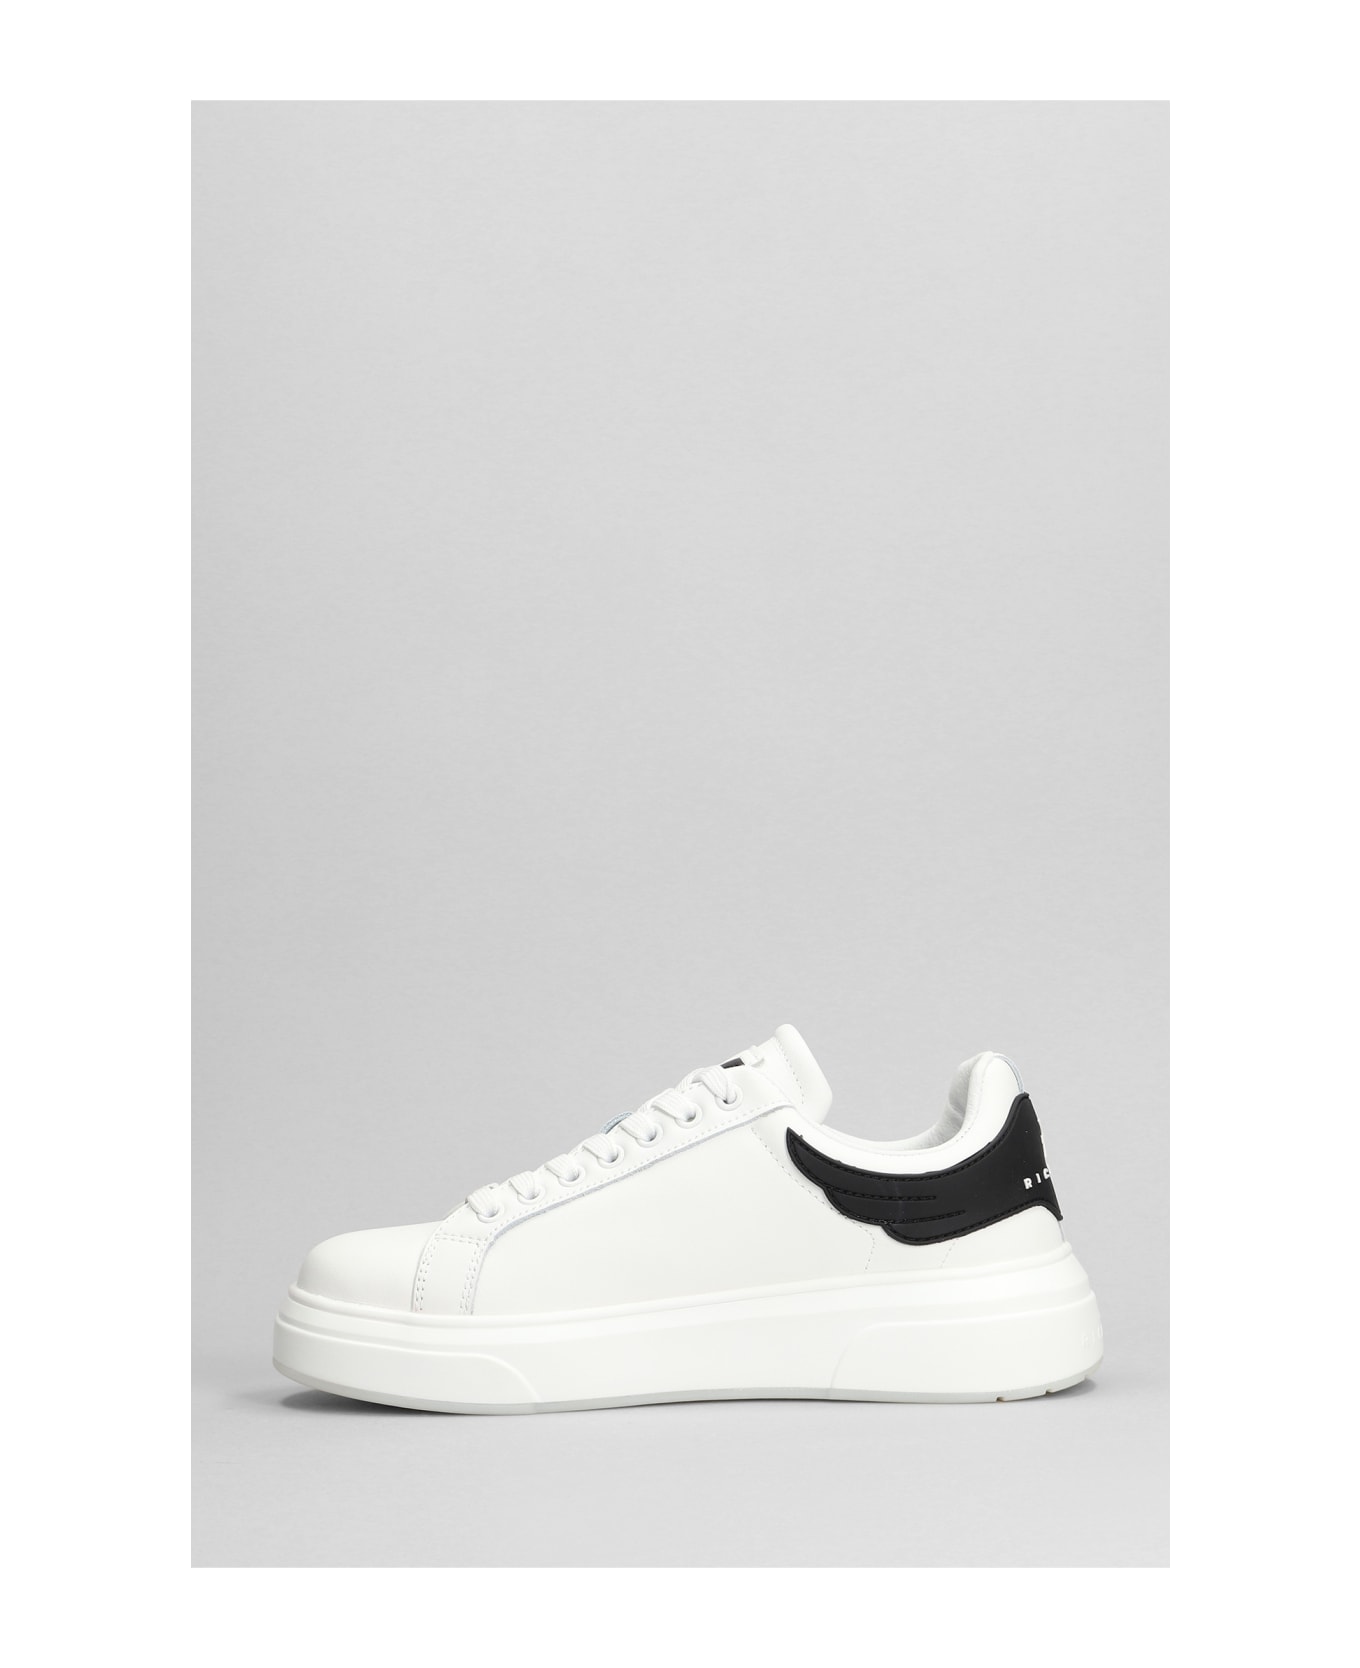 John Richmond Sneakers In White Leather - white スニーカー